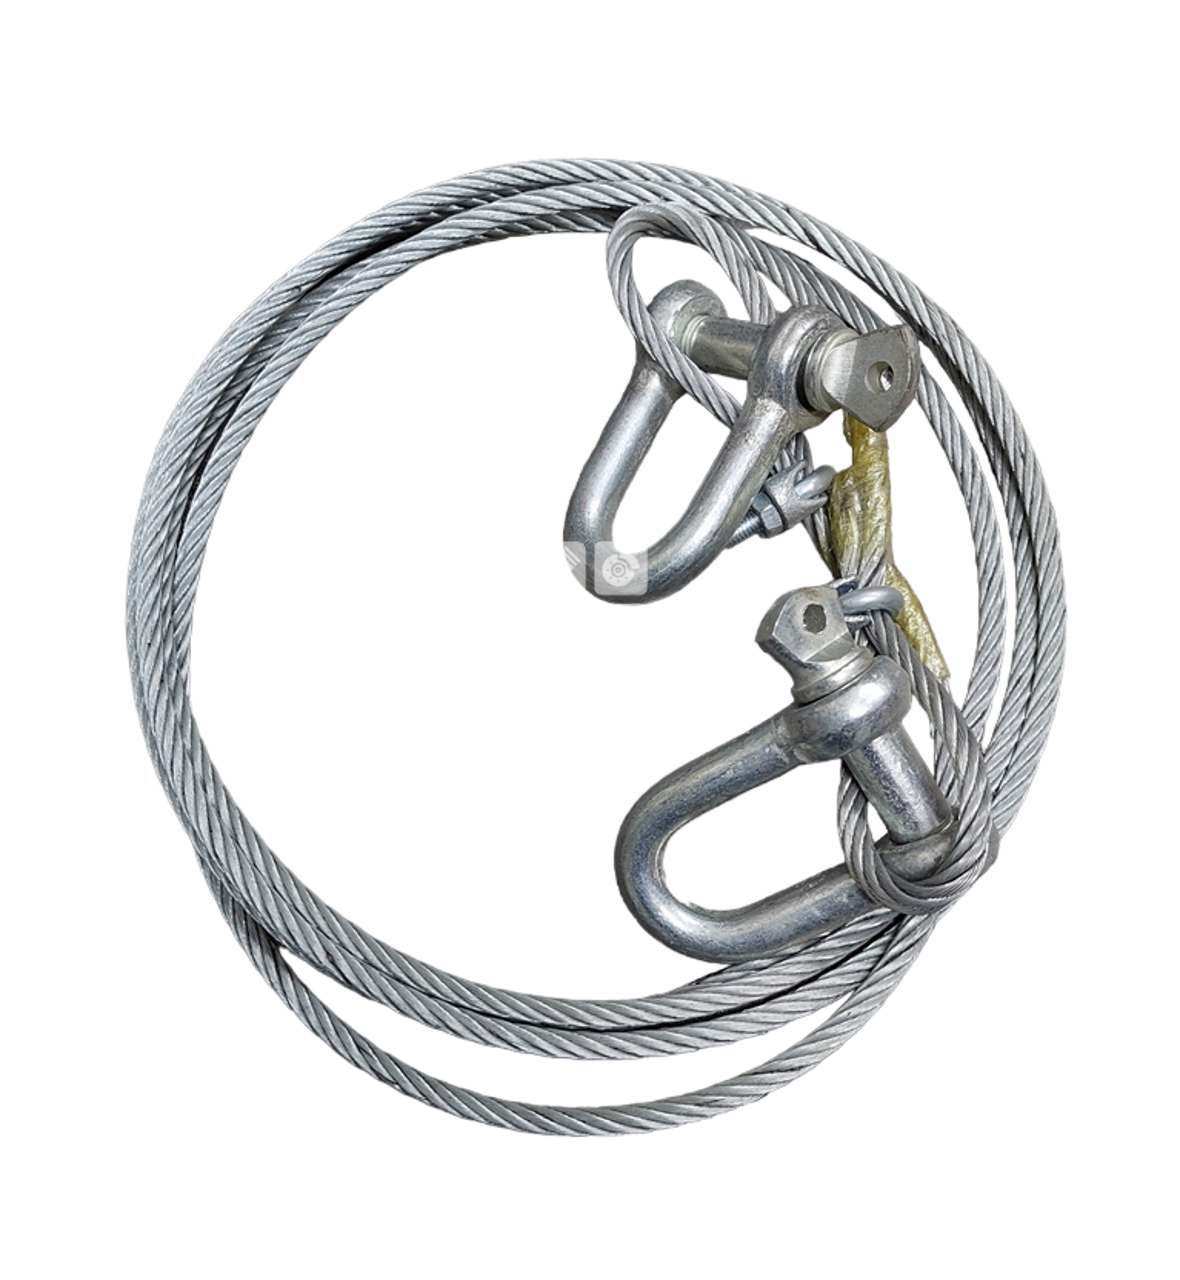 https://pakautoparts.pk/images/thumbs/0018511_steel-tow-cable-rope-with-hooks-3-tons-10-ft_1280.png